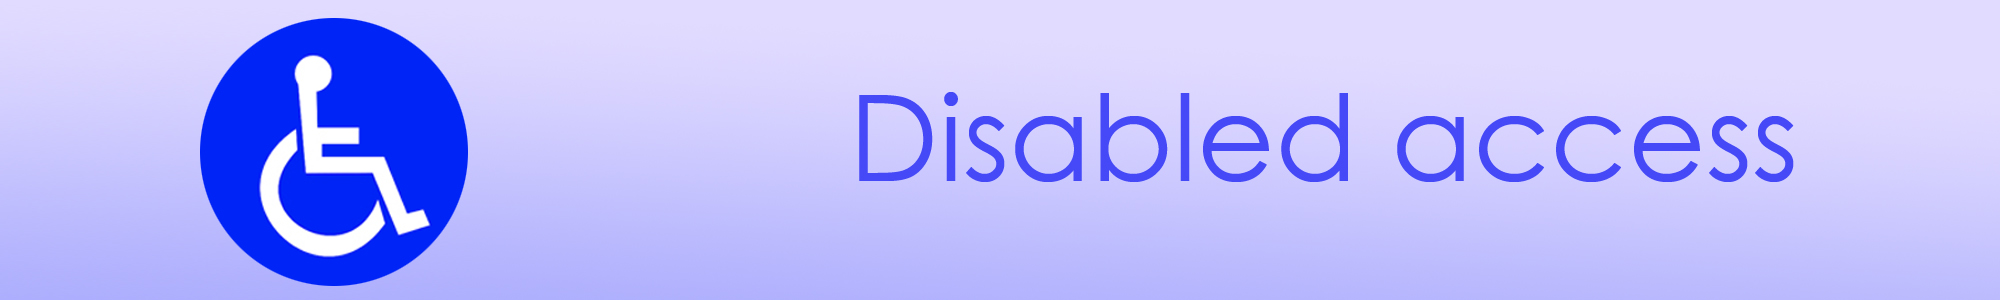 Banner with the caption Disabled access and a small inset image containing a wheelchair icon